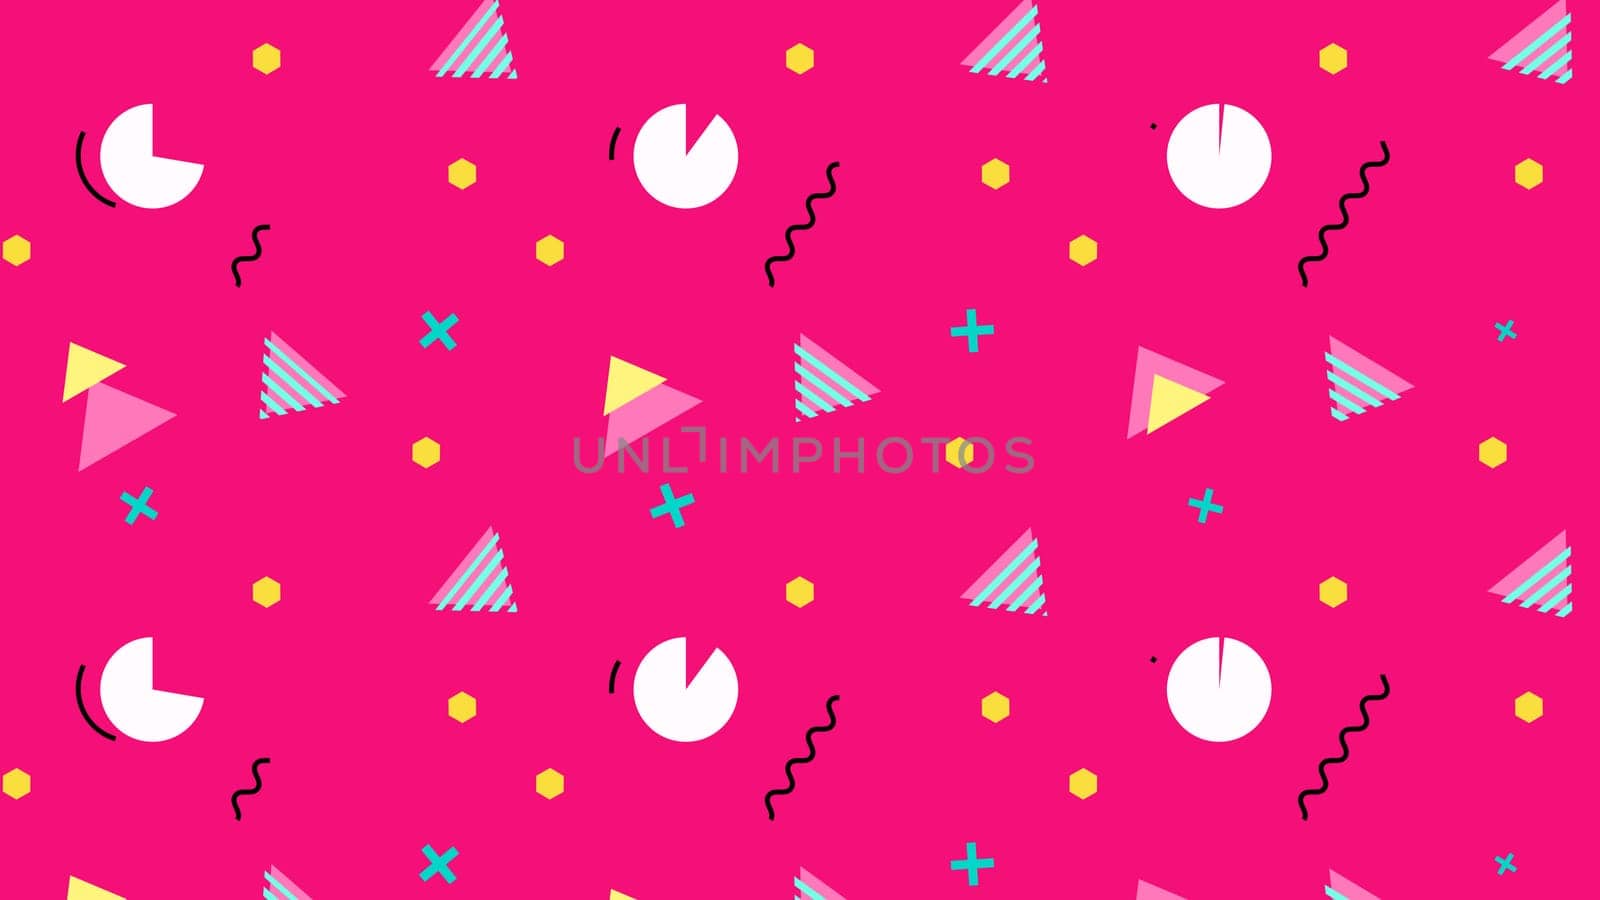 Geometric retro background pop art style with shapes on pink composition. 80s and 90s.